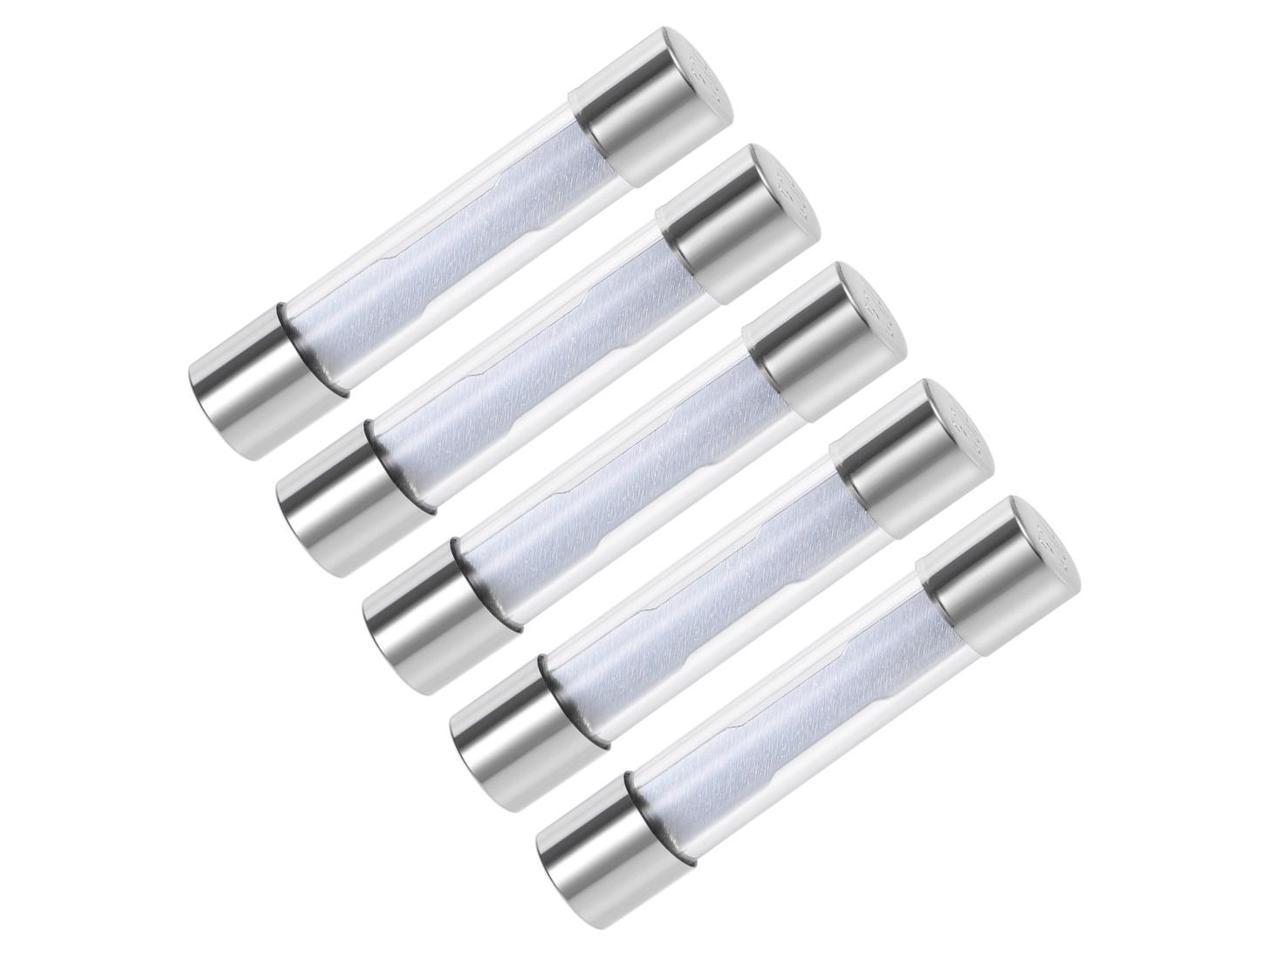 6x32mm Glass Slow Blow Time Delay Fuse Various Amps and Pack Sizes 